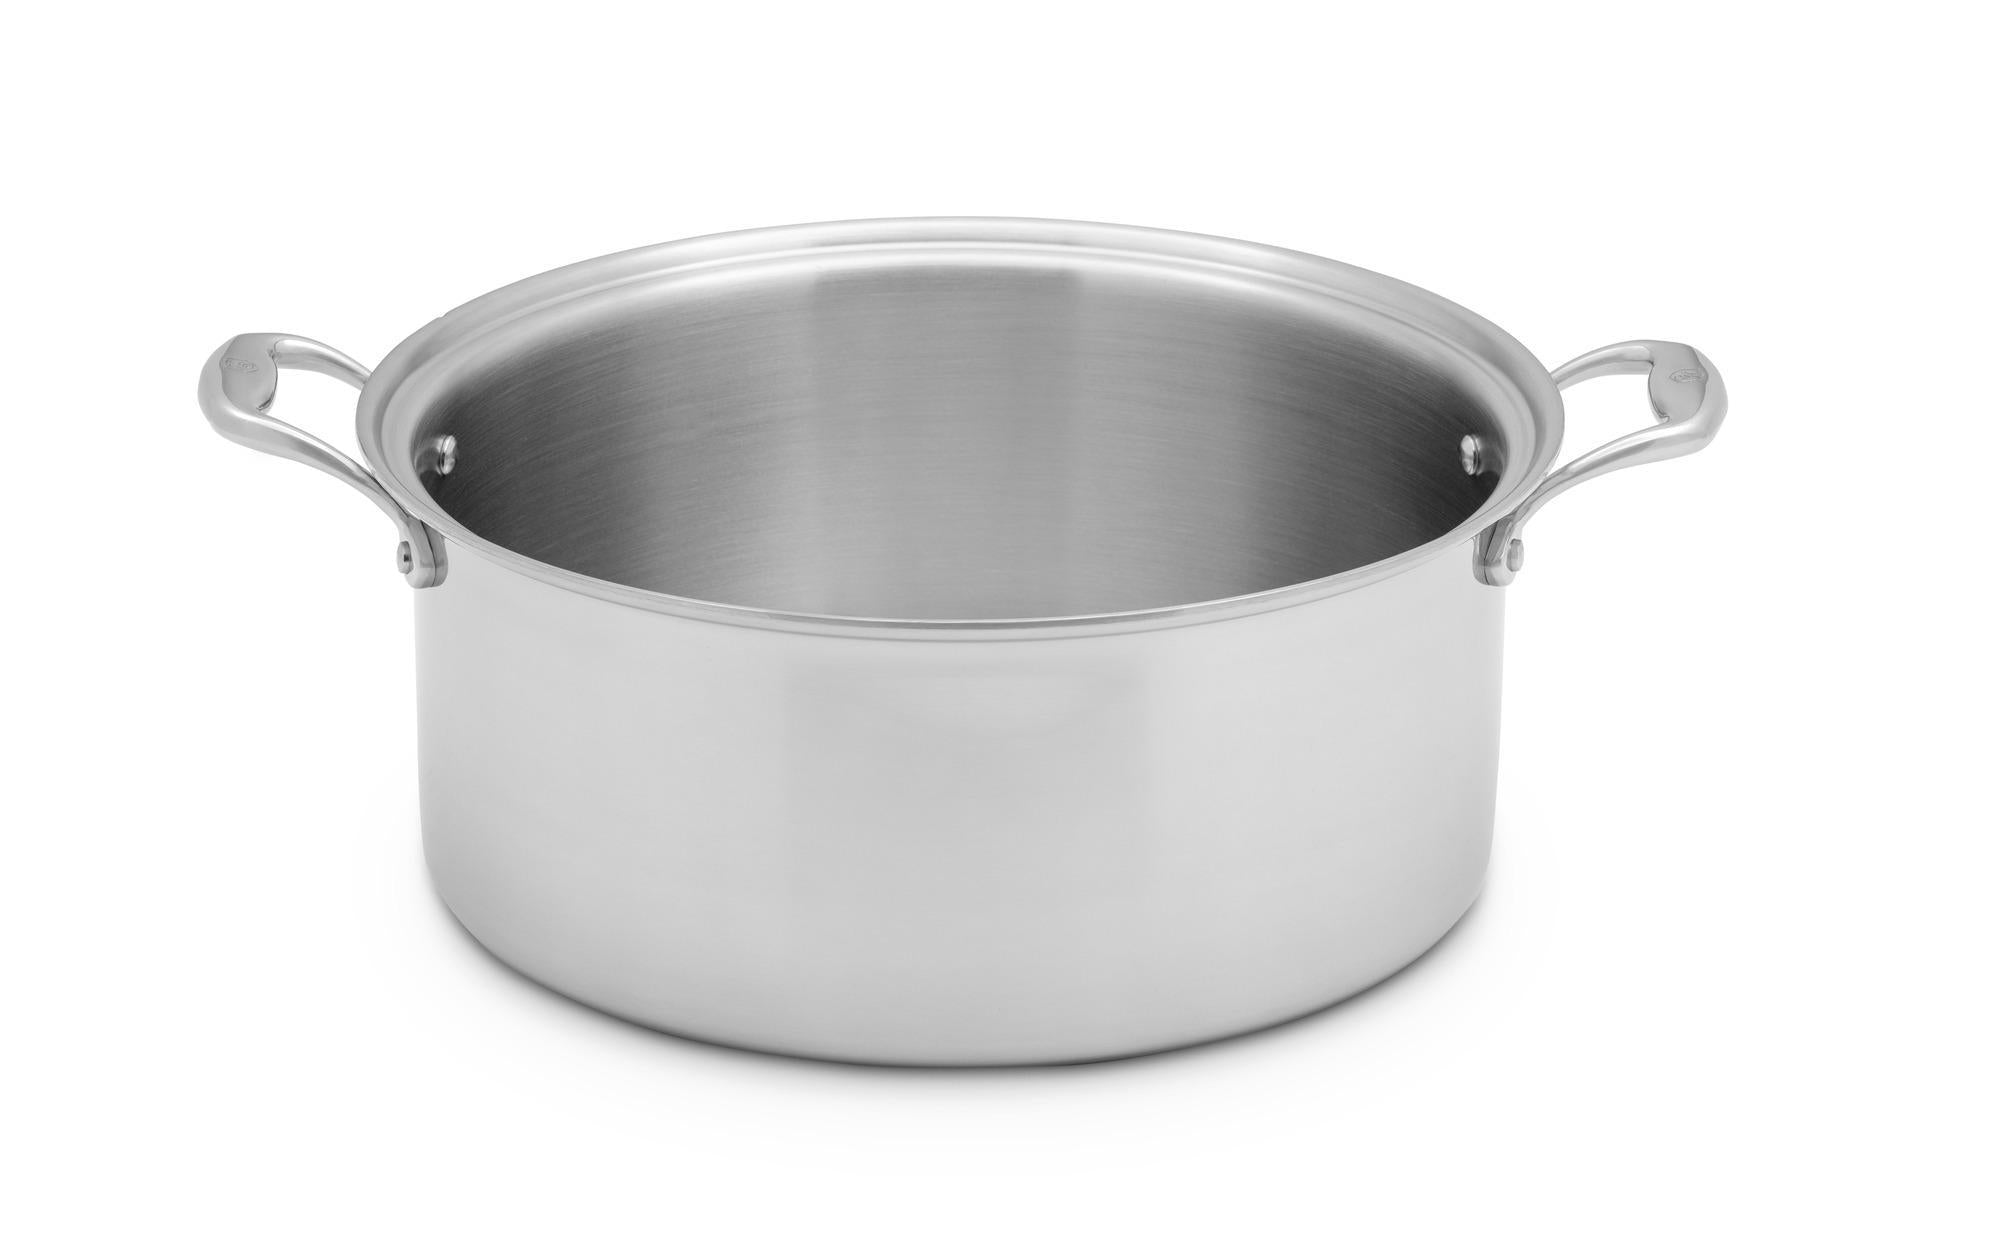 Heritage Steel Titanium Series 4 Quart Saucepan with Lid, 5-Ply Clad  Stainless Steel Cookware with 316Ti, Made in USA